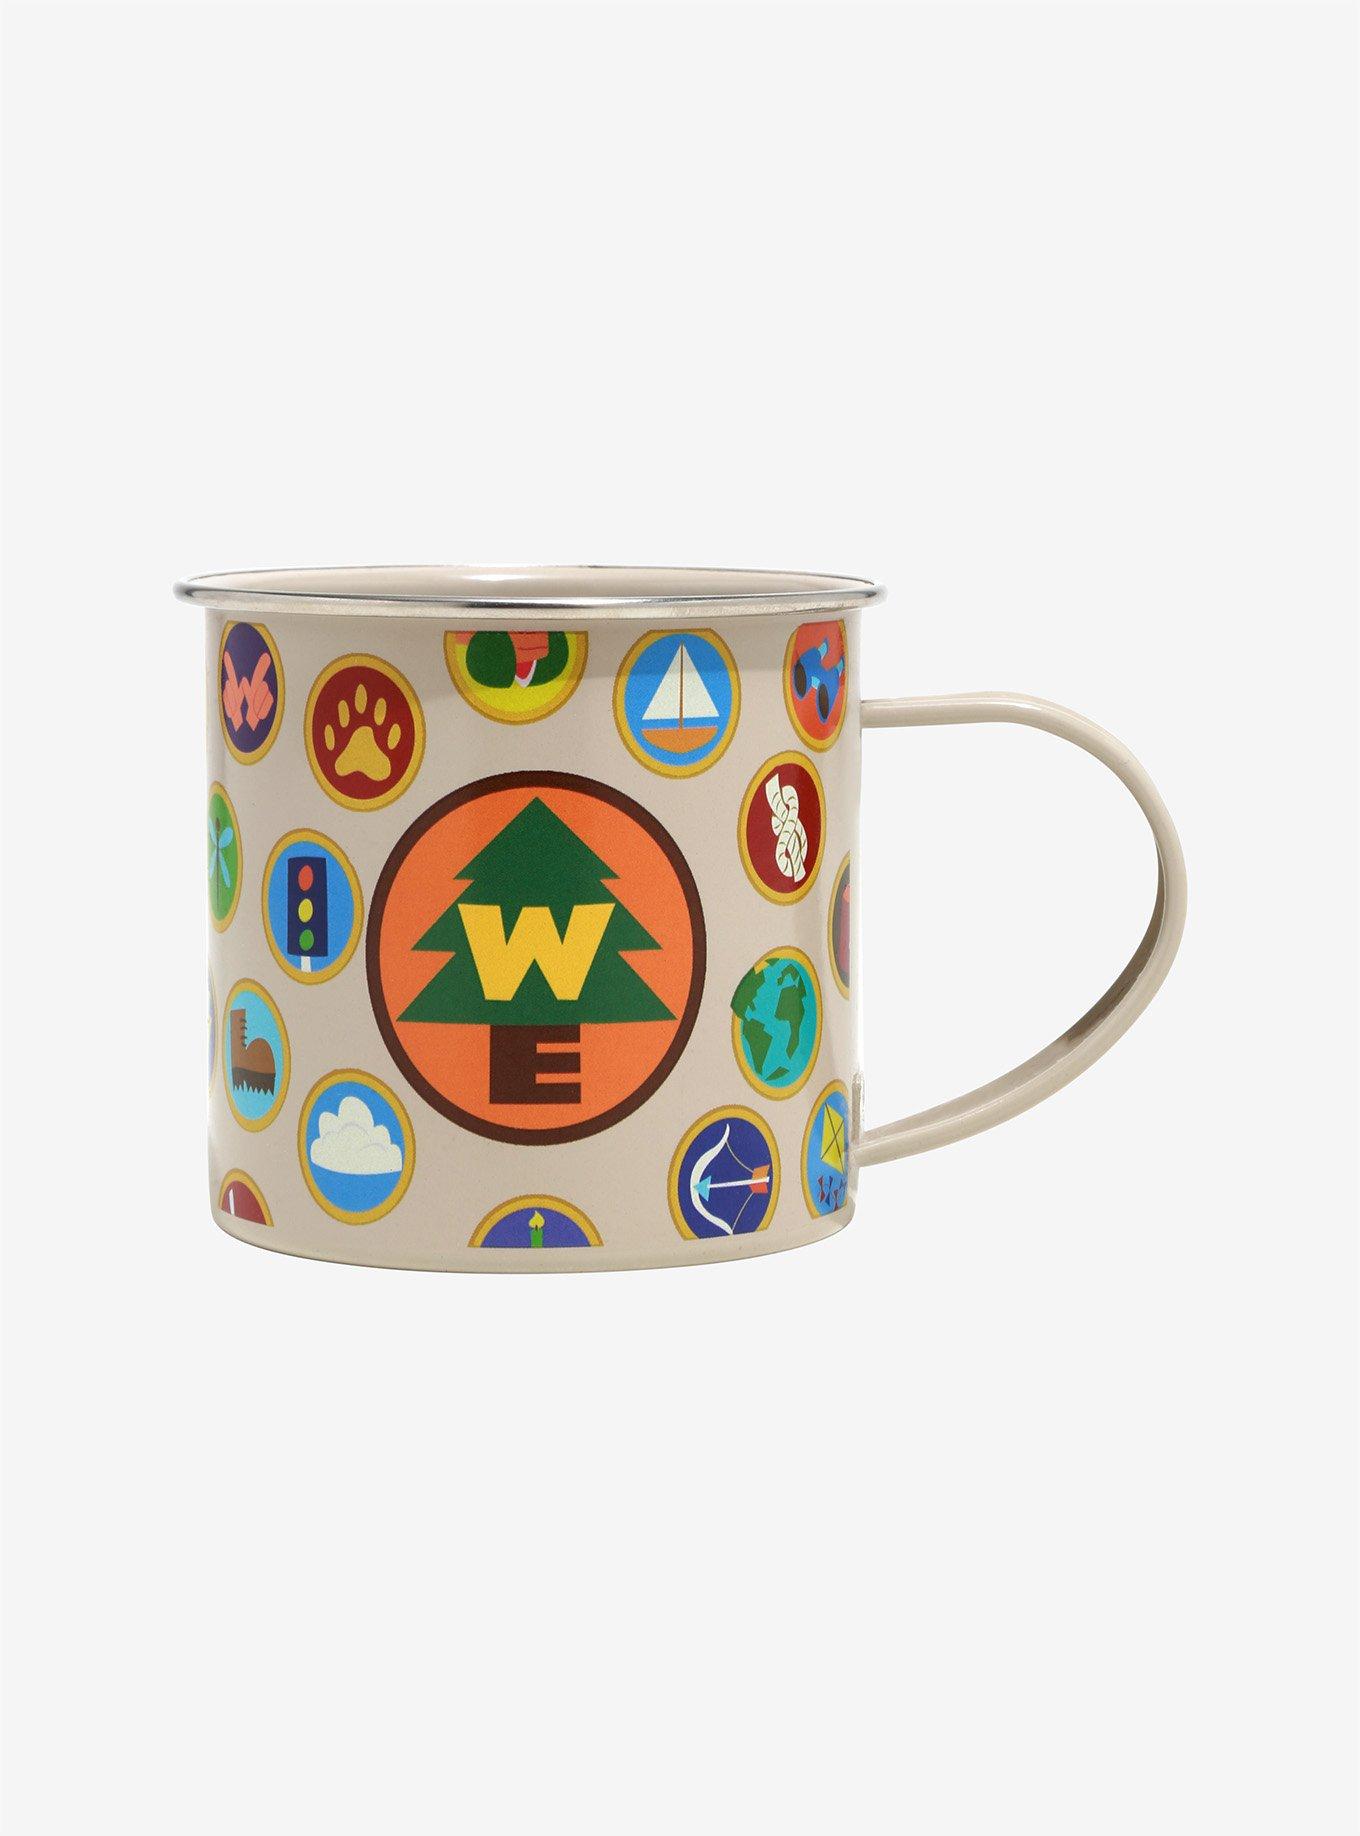 Perfect Cosplaying Gifts I Don't Want To Be Right. If Cosplaying Is Wrong Cosplaying 12oz Camper Mug From